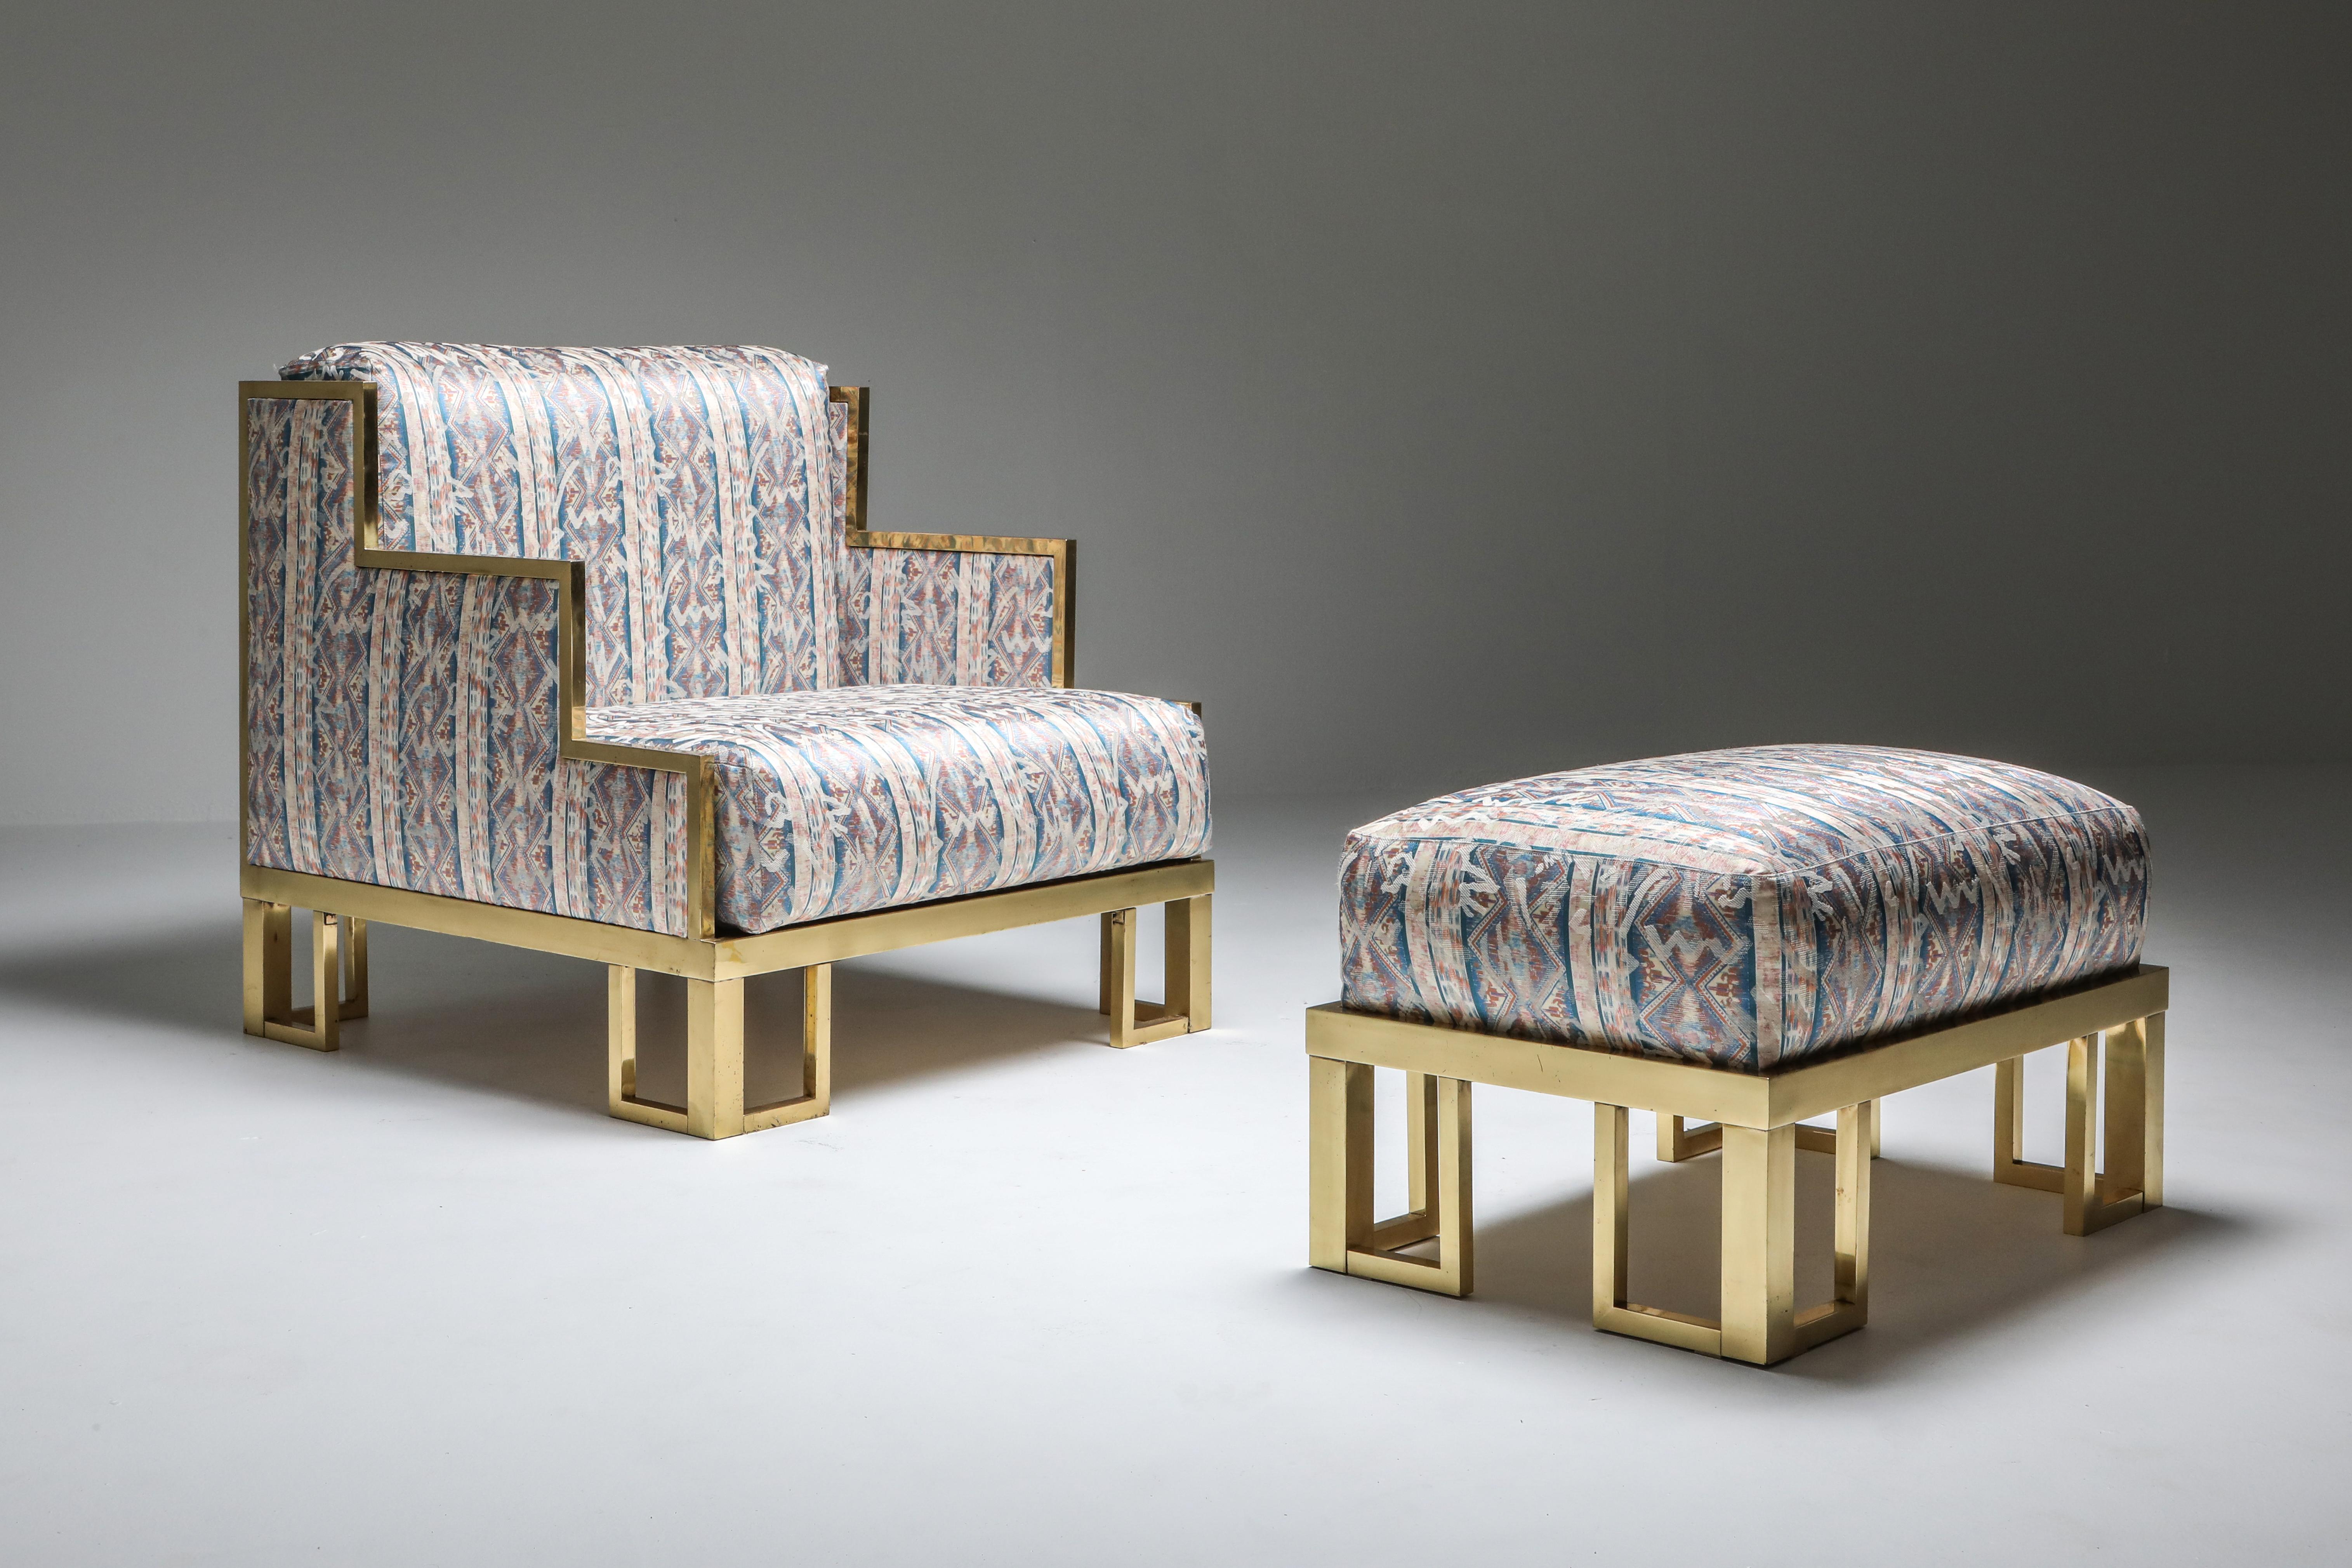 Lounge chair and ottoman, Italy, 1970s.

Original silk upholstery
In case your prefer another color or type of fabric.
        